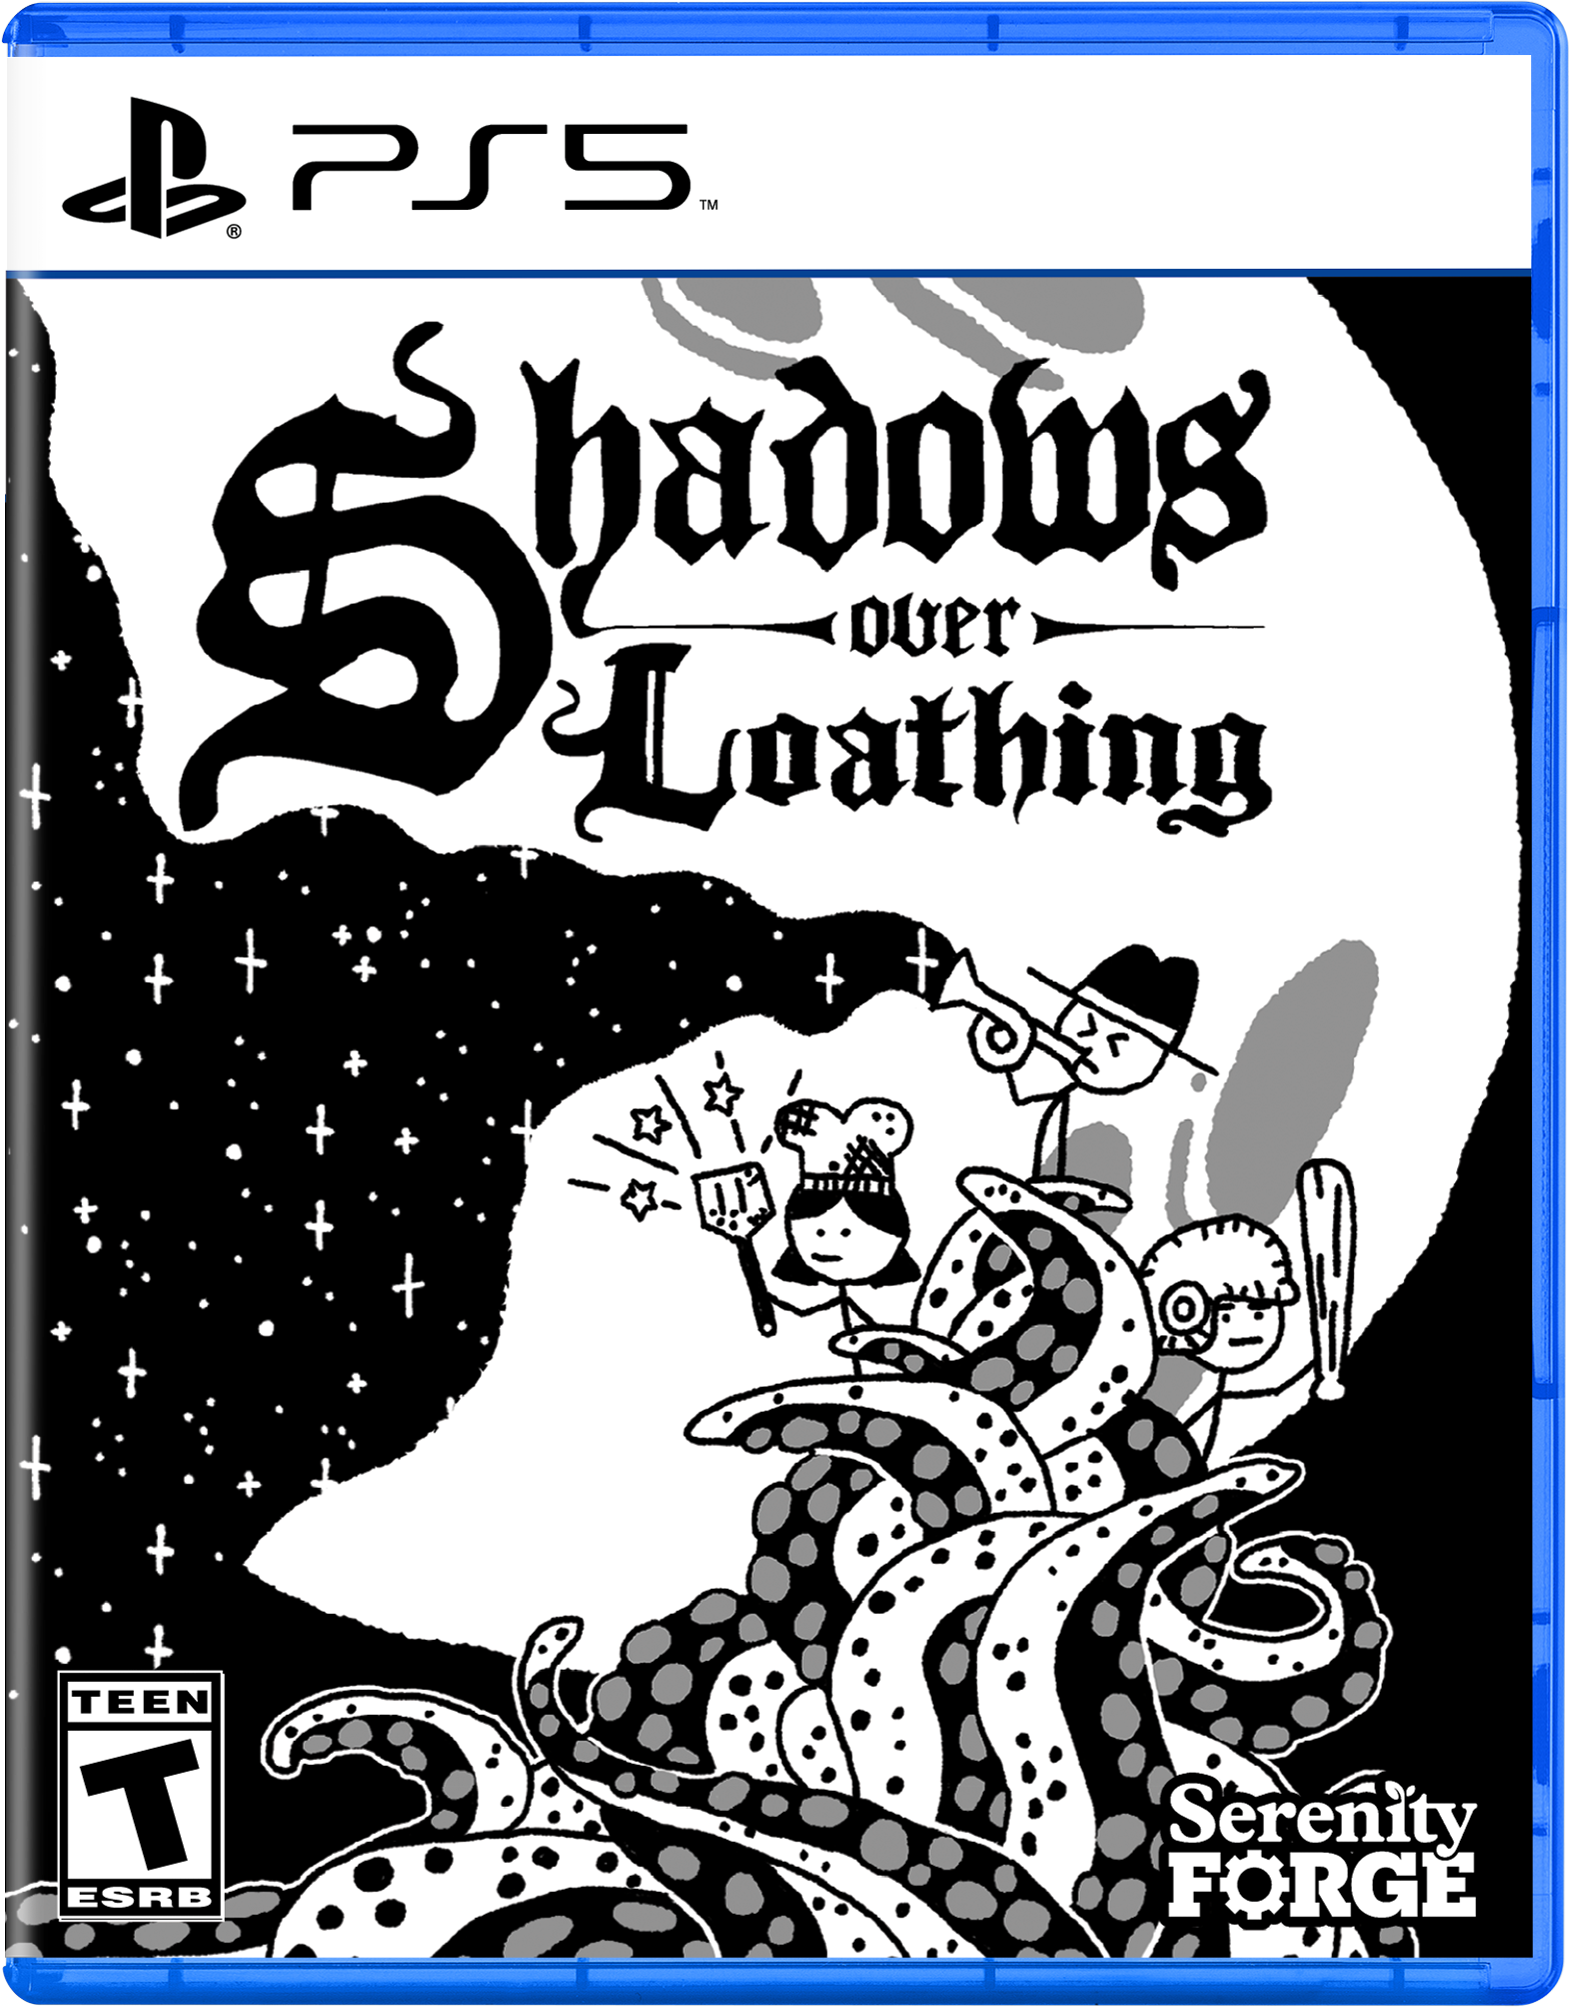 Shadows Over Loathing - PlayStation 5